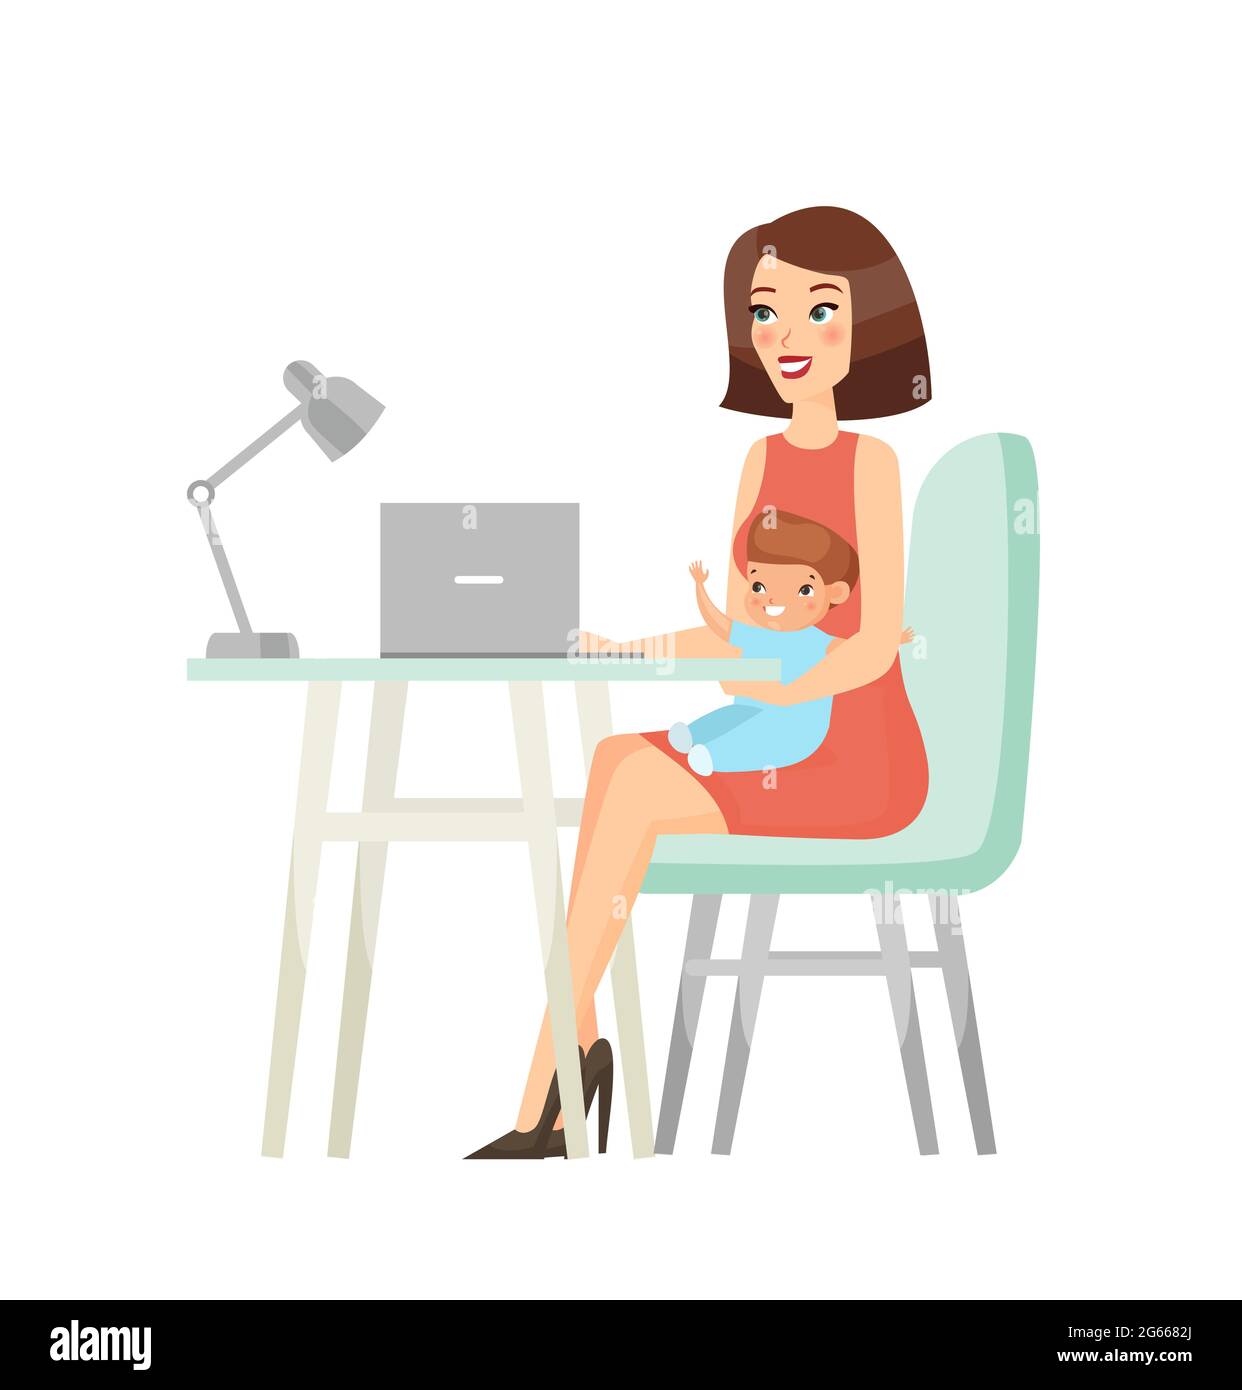 Working mother flat vector illustration. Businesswoman, female office manager with kid. Busy mom, young woman working on computer and baby cartoon Stock Vector